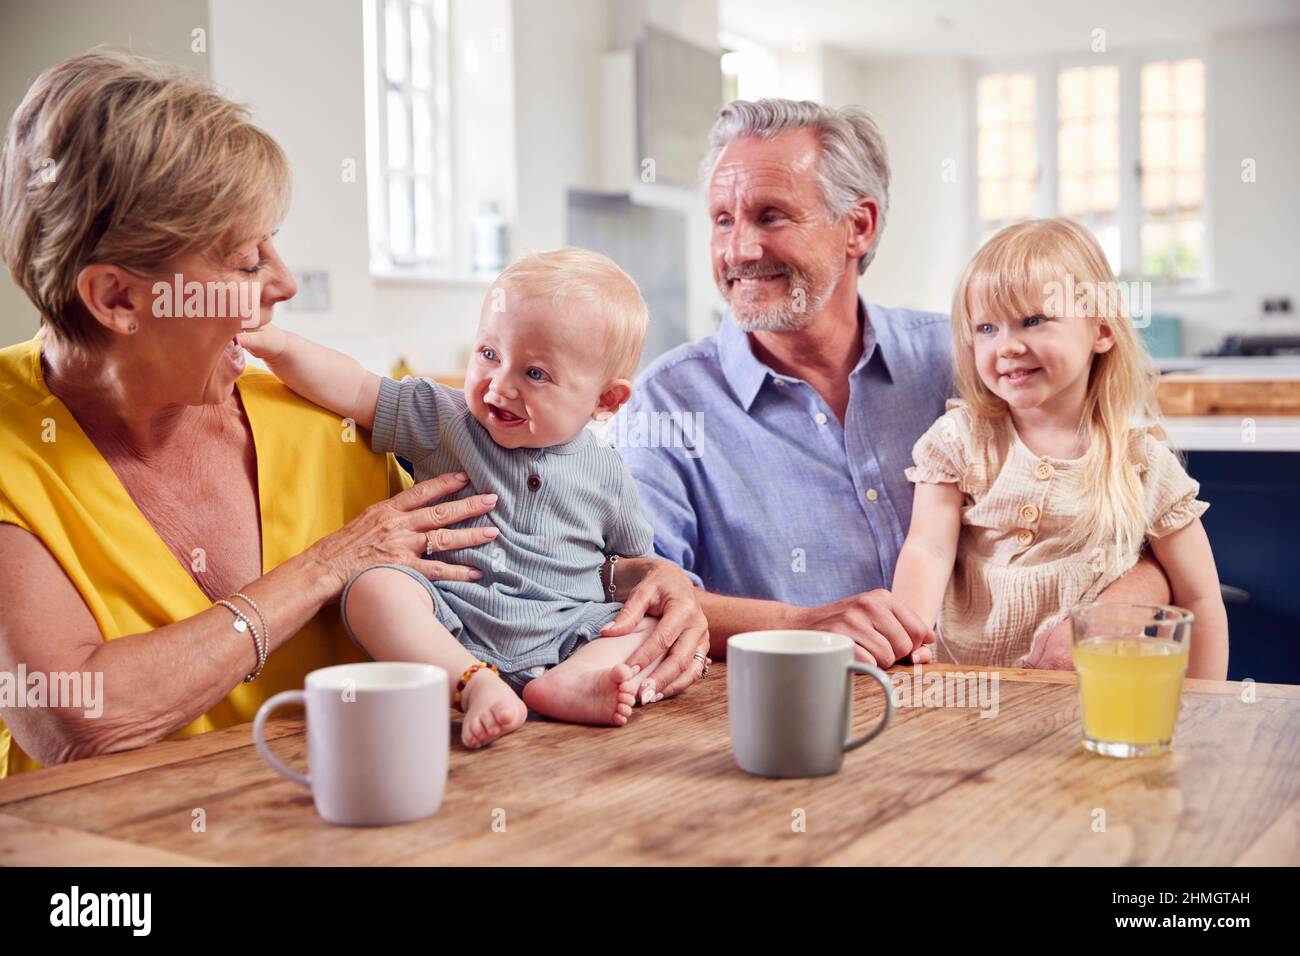 Grandparents Looking After Laughing Granddaughter And Baby Grandson Sitting At Kitchen Table Stock Photo